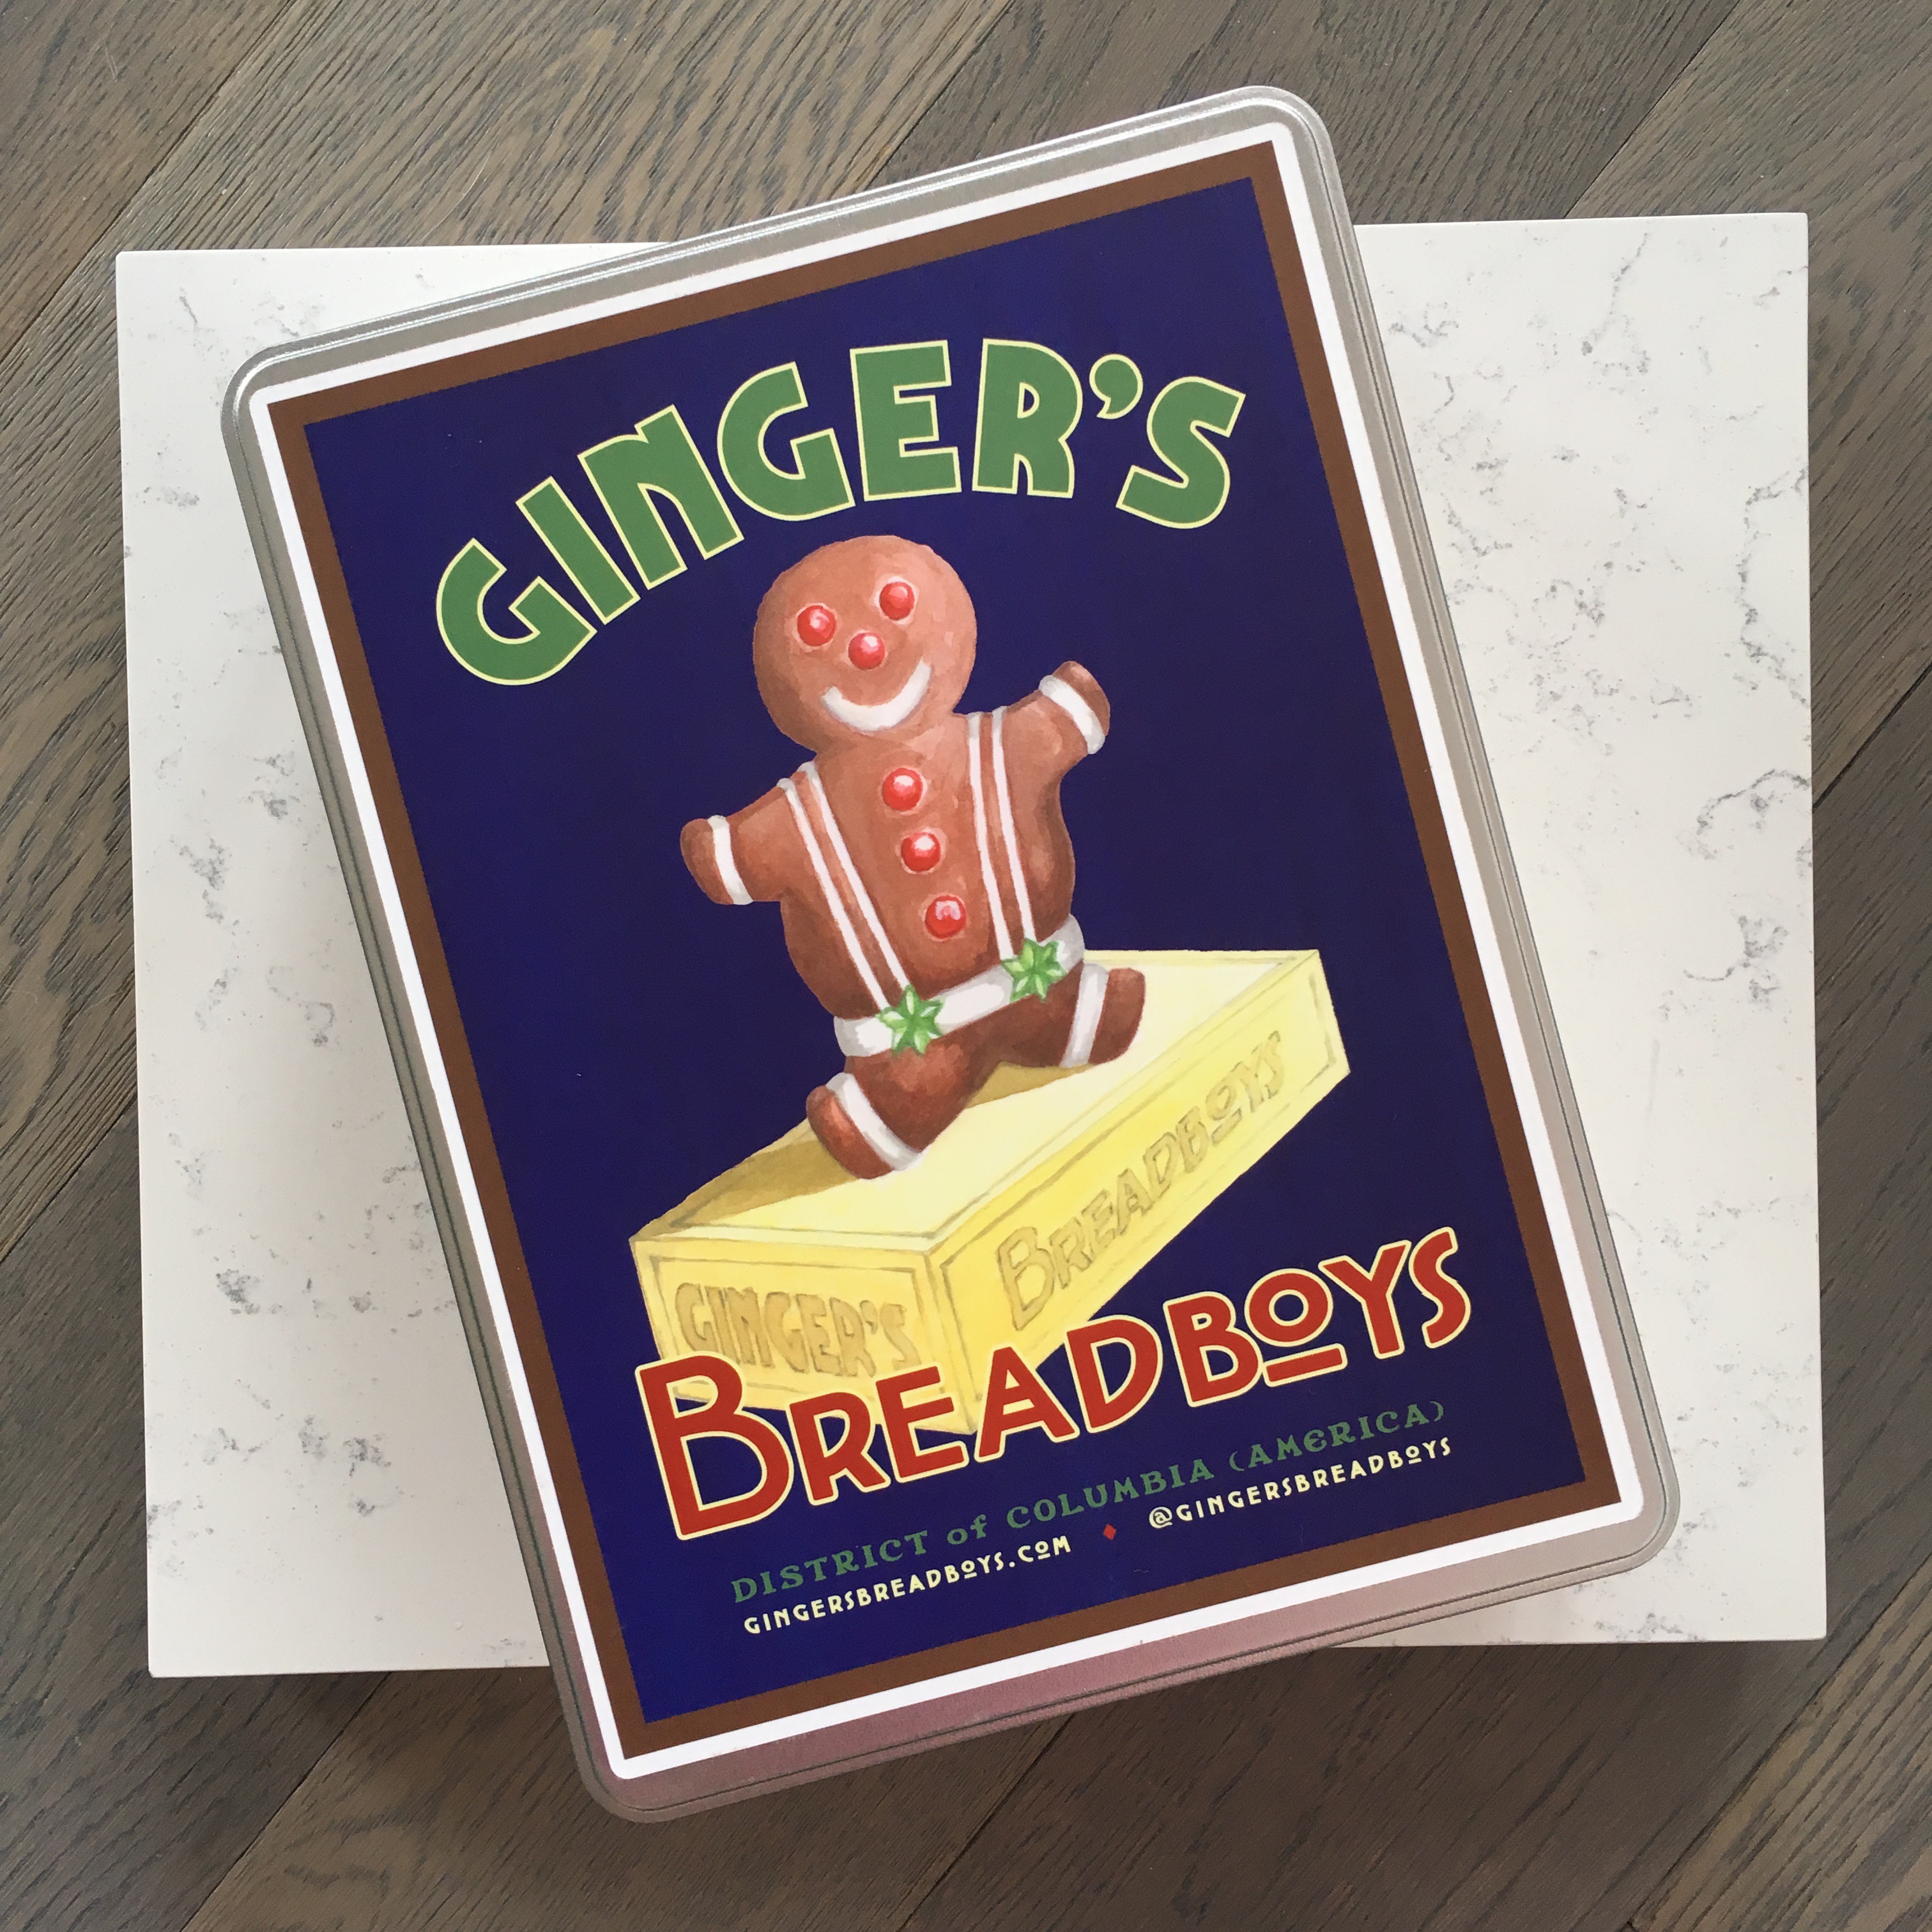 Original Tin Can label for the Gingerbread kit from Ginger's Breadboys